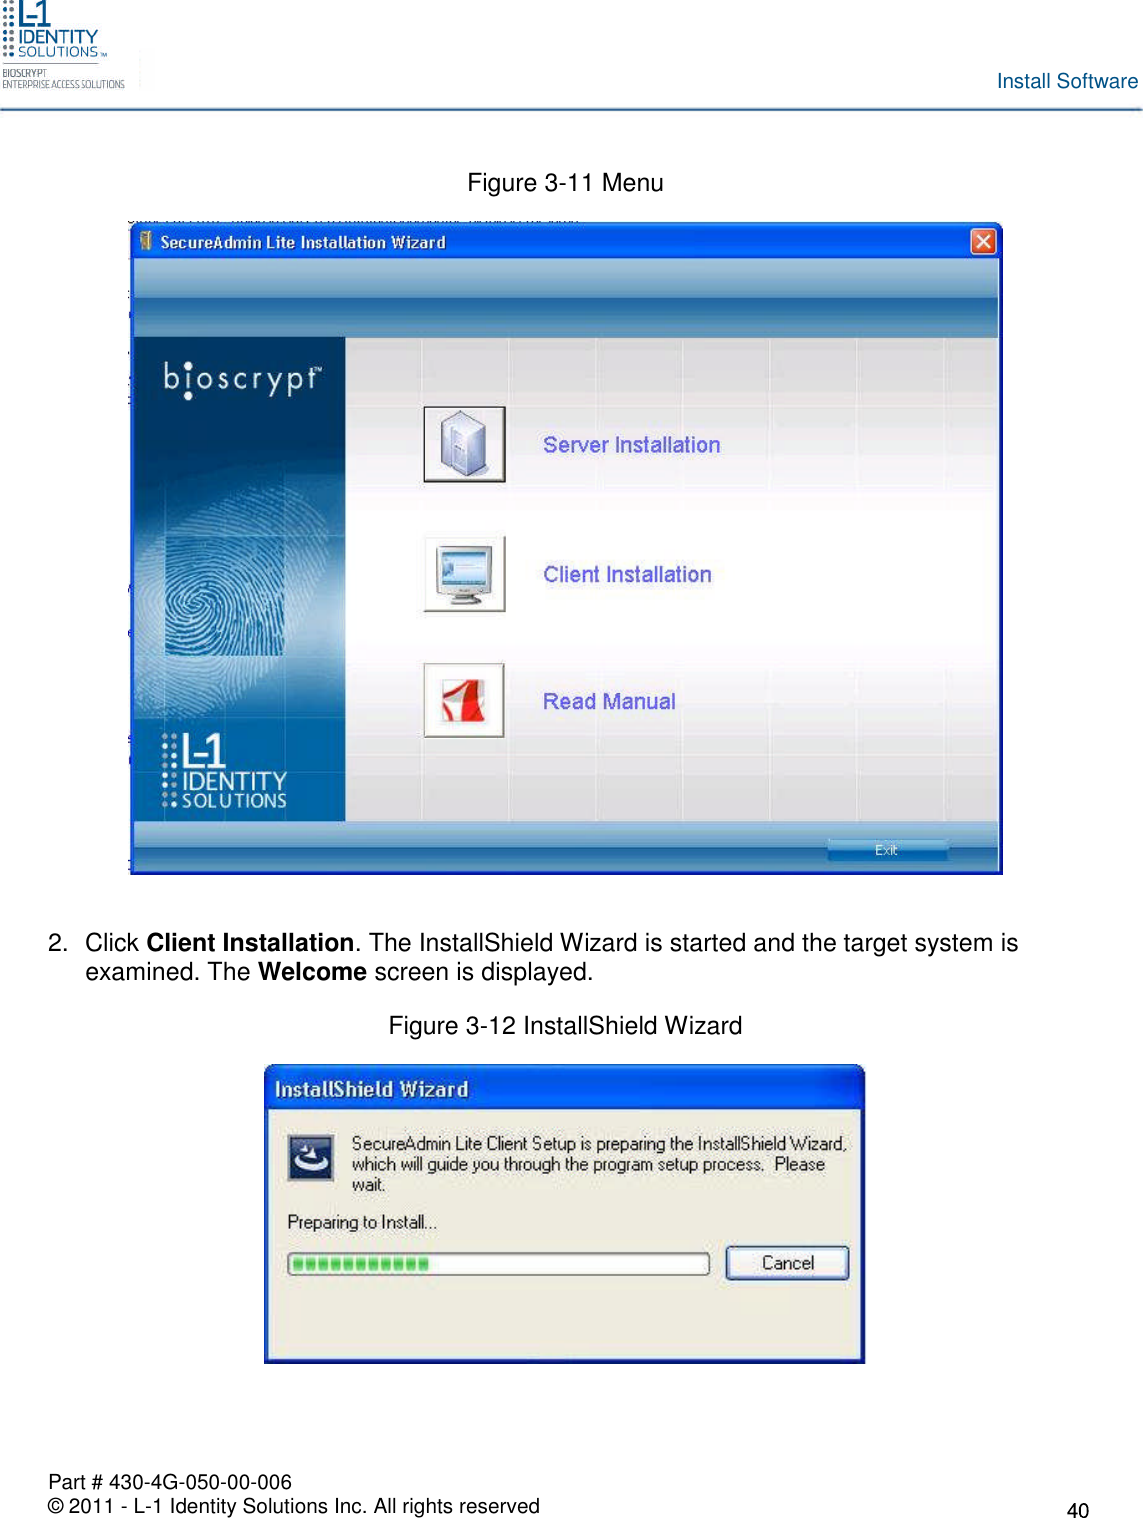 Part # 430-4G-050-00-006© 2011 - L-1 Identity Solutions Inc. All rights reservedInstall SoftwareFigure 3-11 Menu2. Click Client Installation. The InstallShield Wizard is started and the target system isexamined. The Welcome screen is displayed.Figure 3-12 InstallShield Wizard